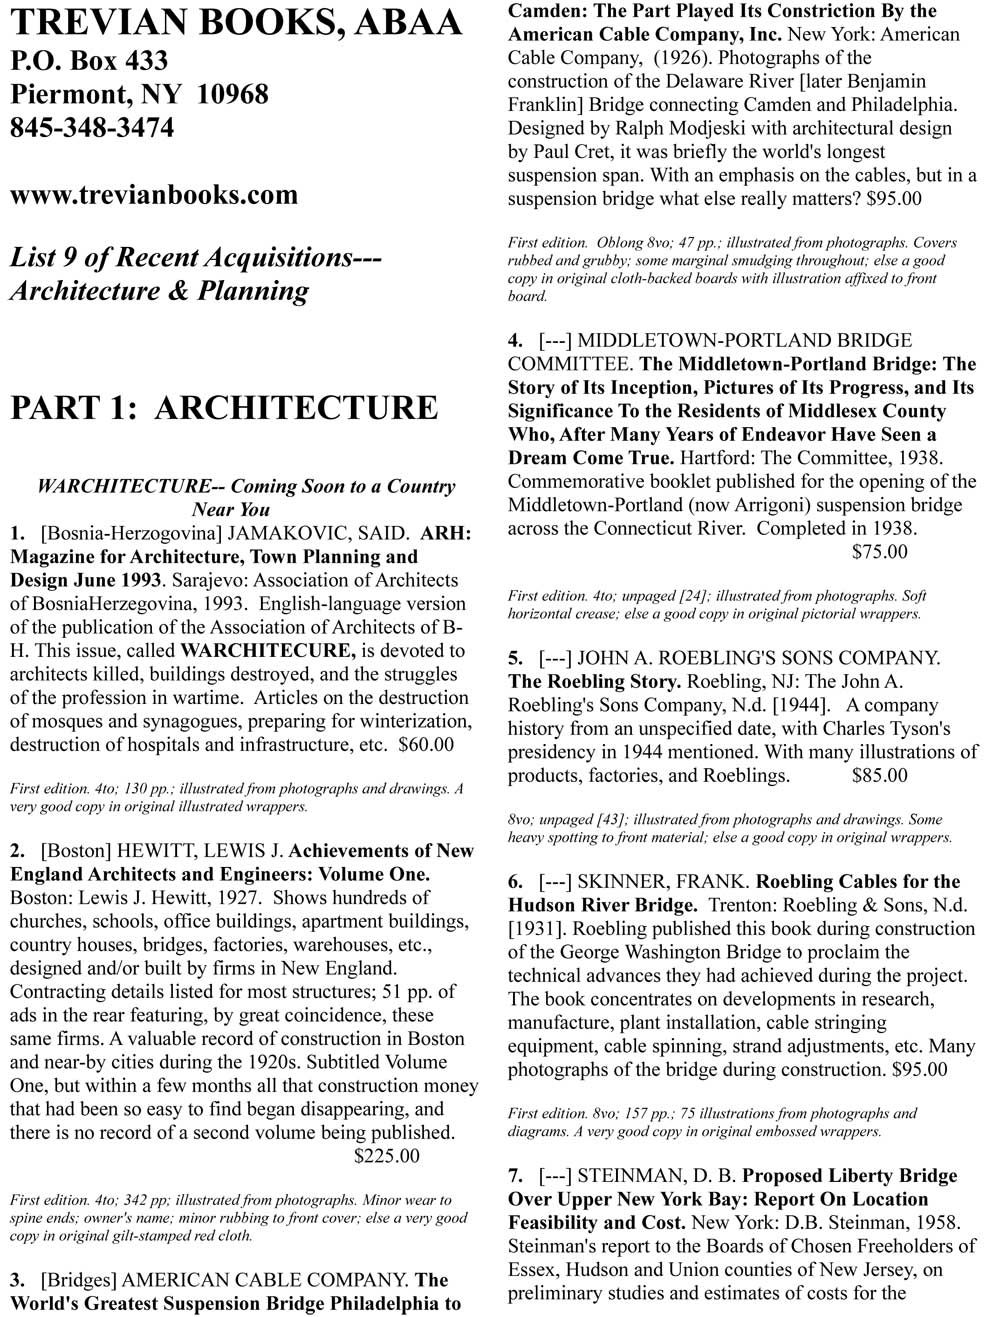 List 9 Architecture and Planning